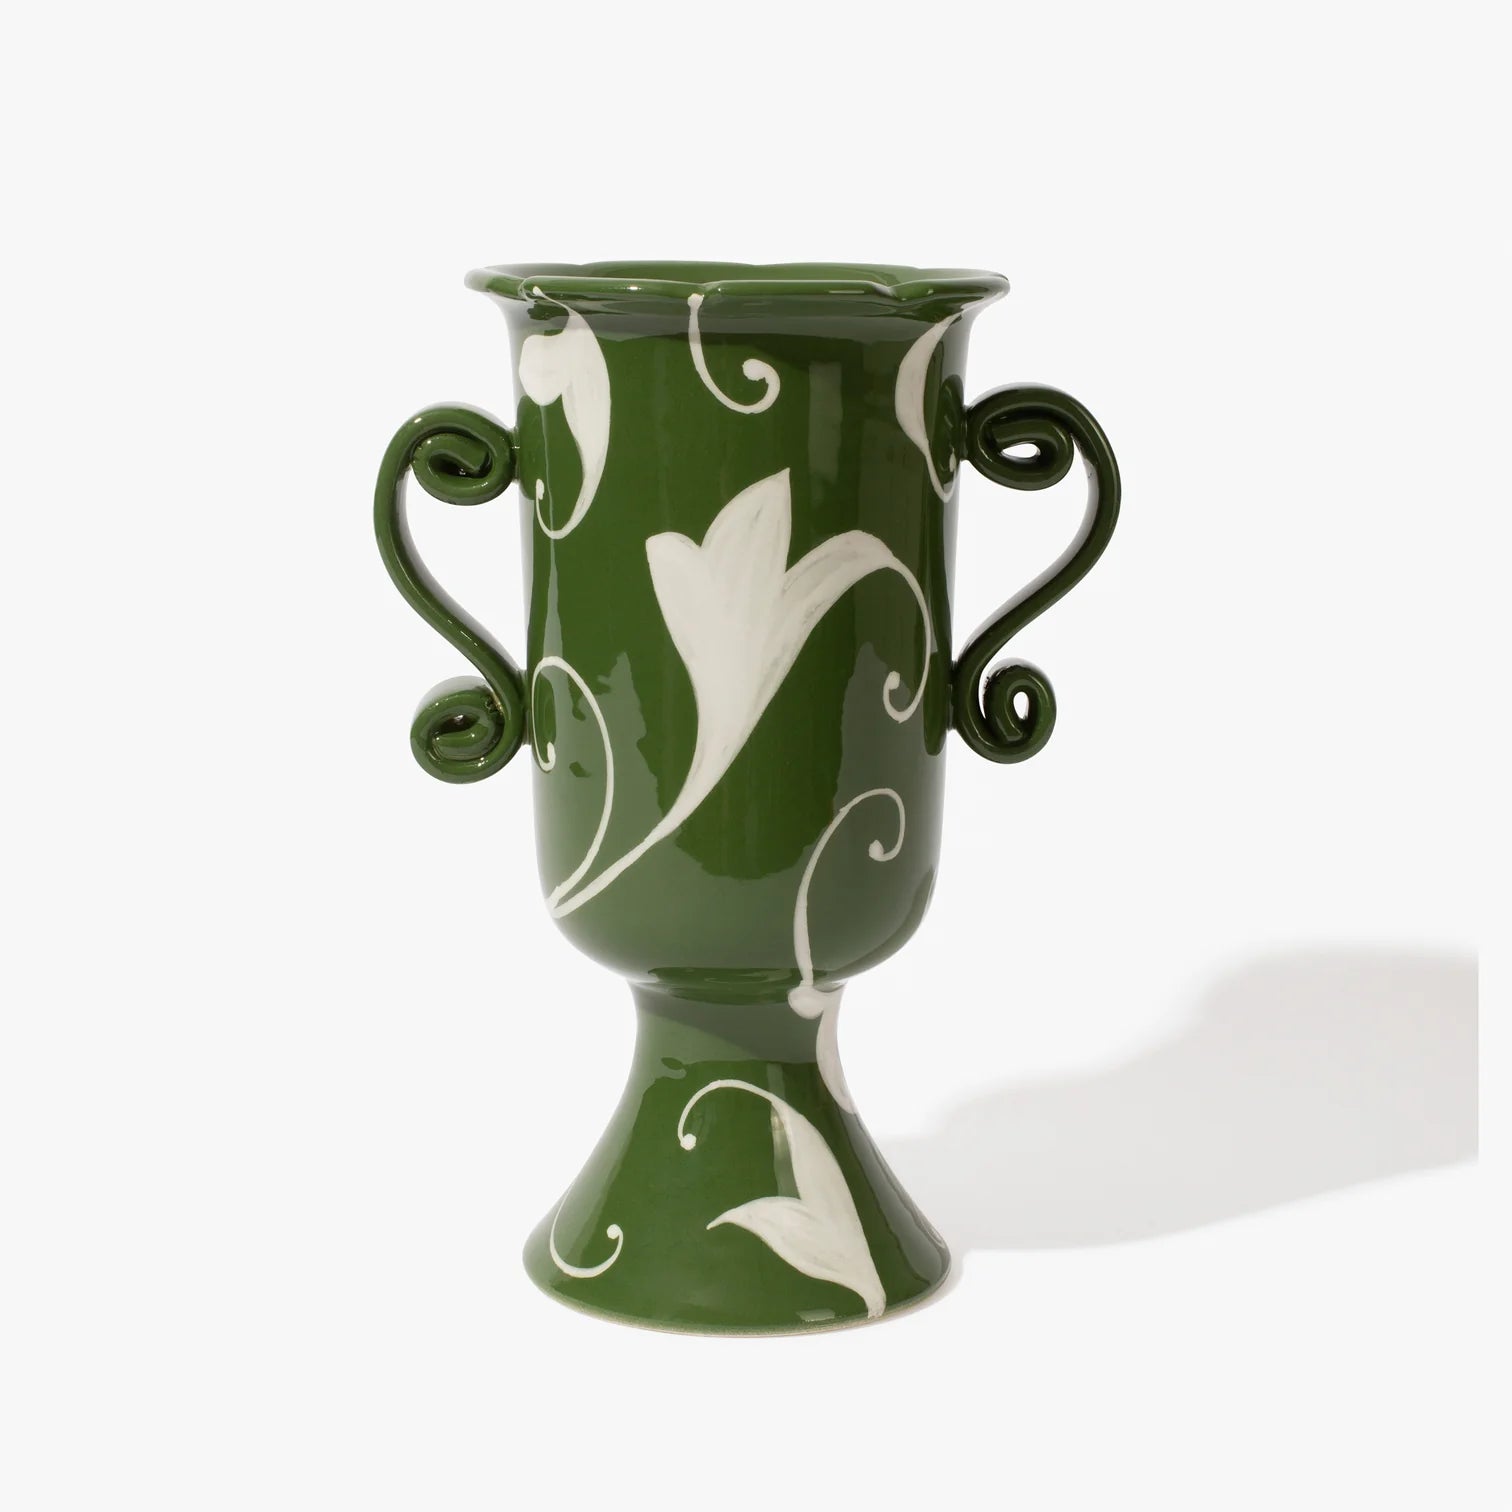 Tall forest green coloured vase in an urn shape with two ornate handles. It has a white floral pattern painted on the vase and the top of the case has ascalloped edge. 